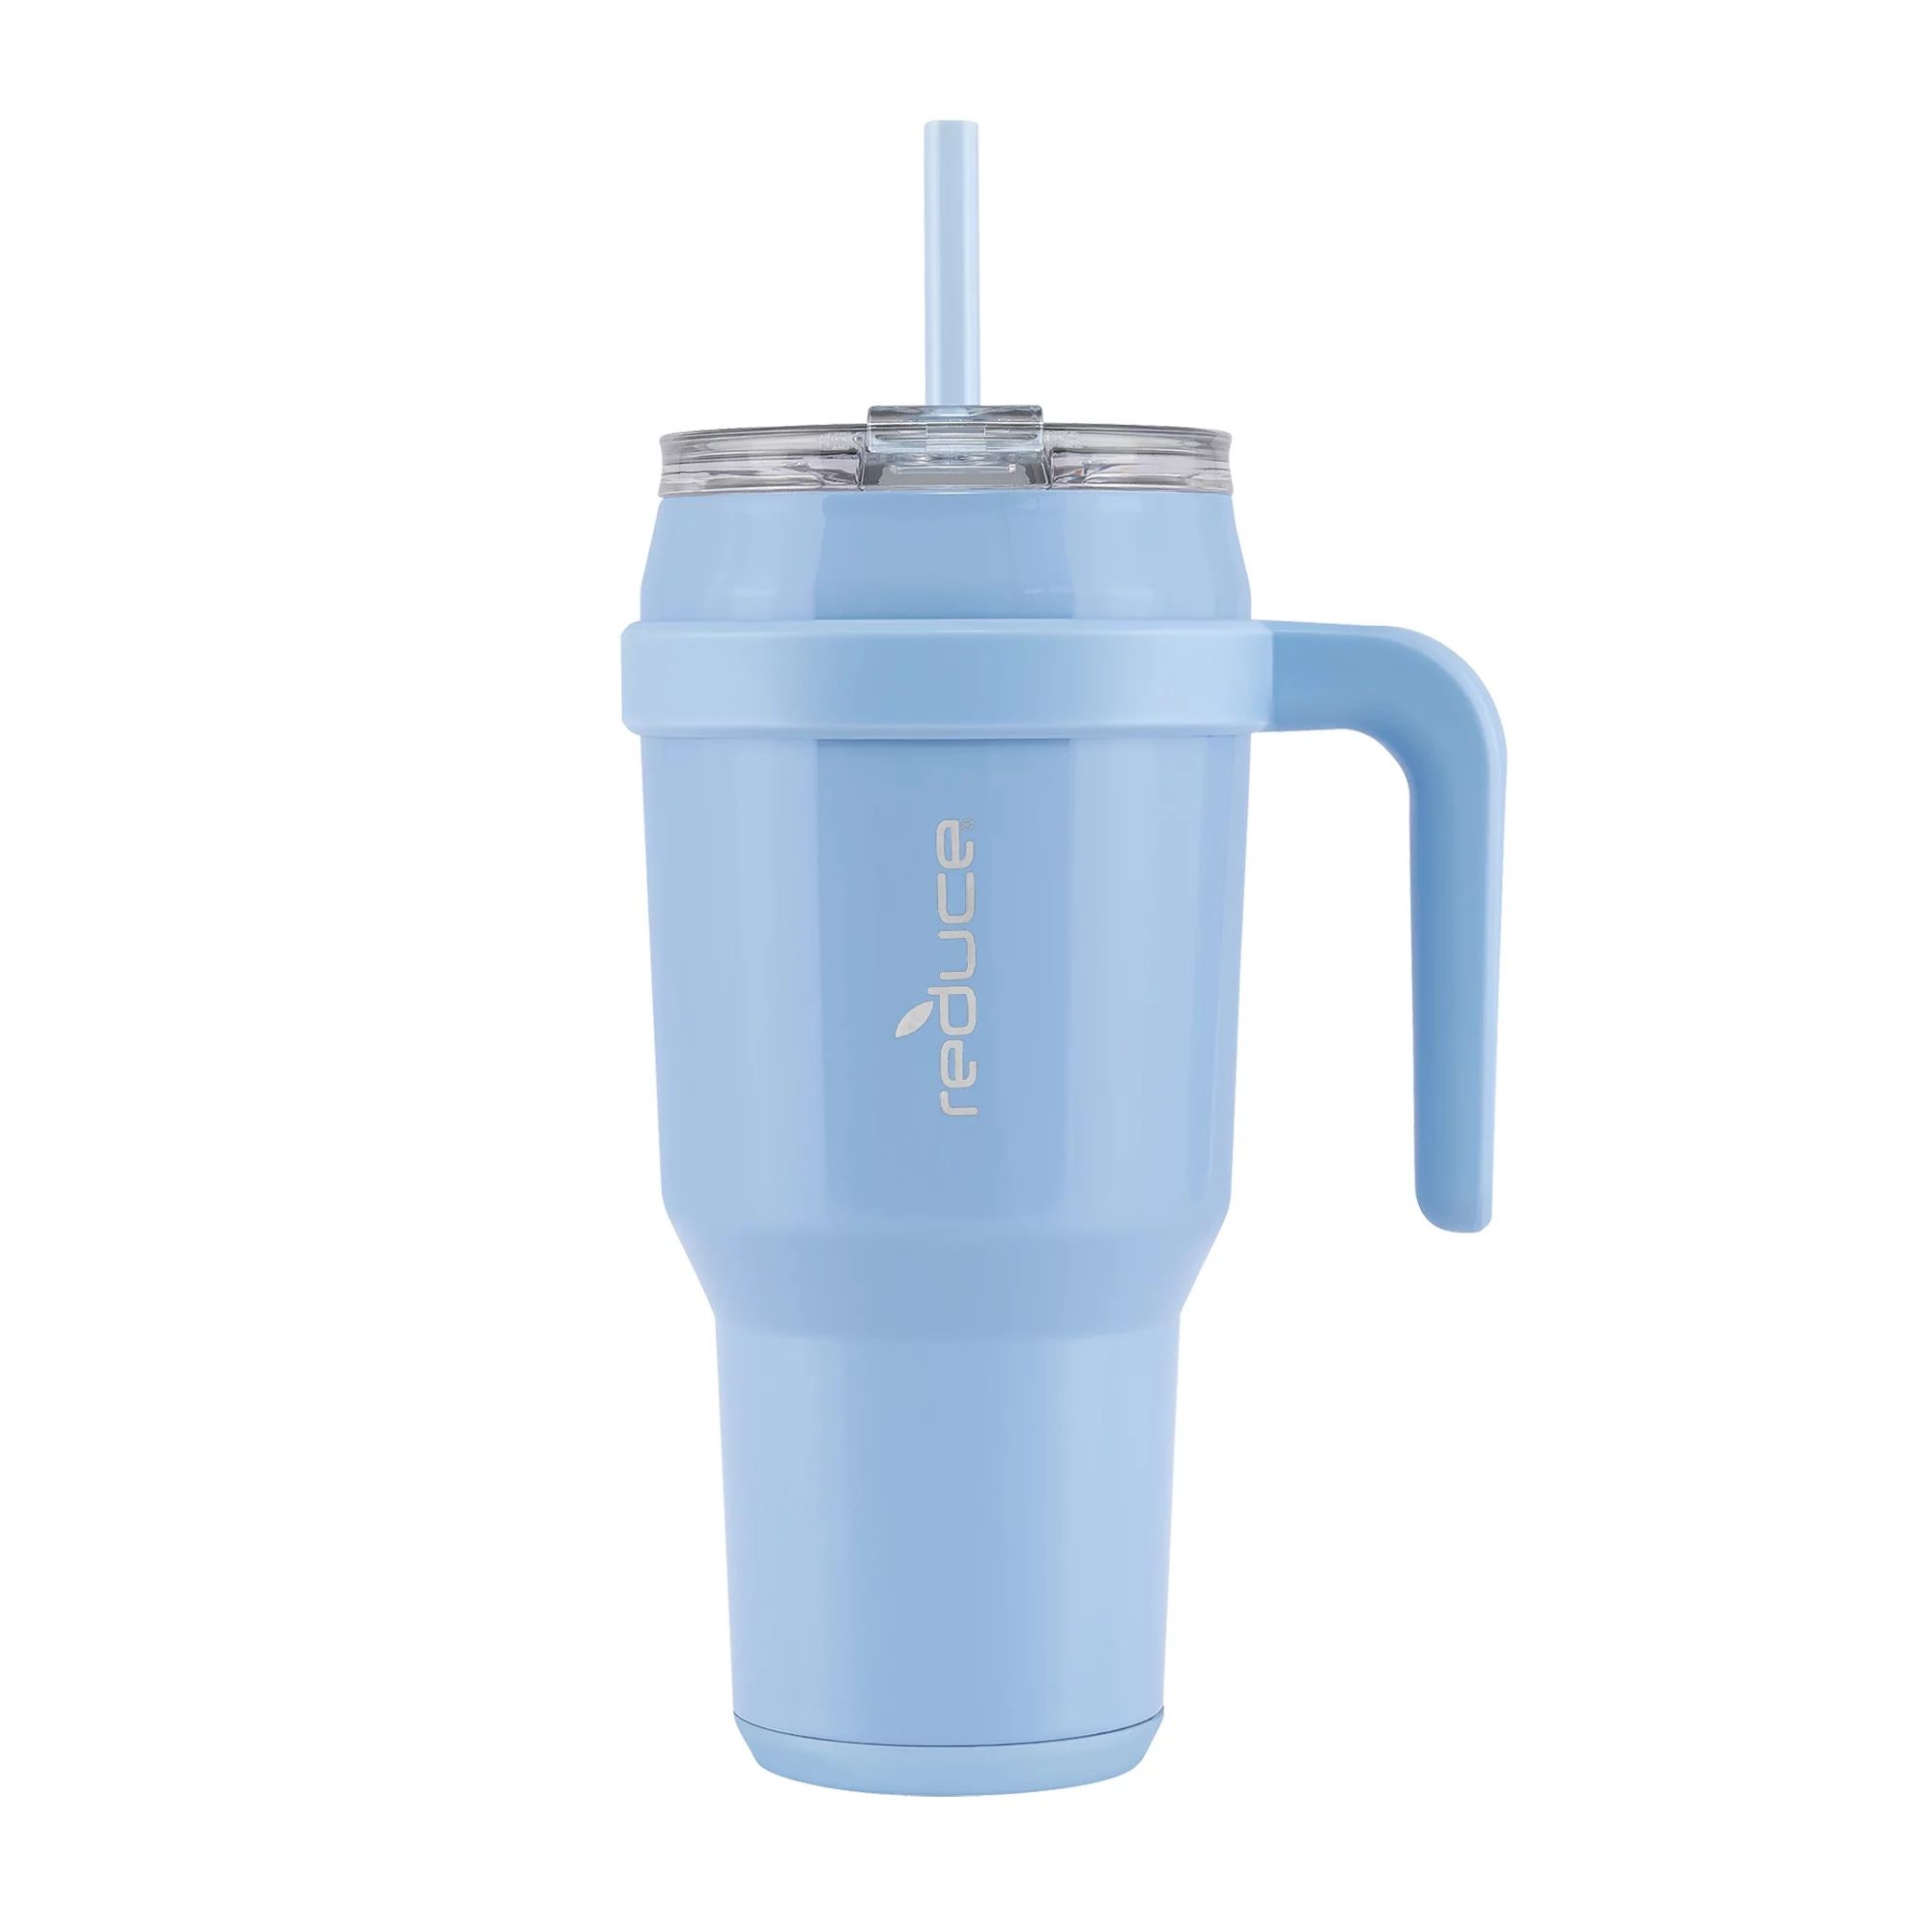 Reduce Cold1 Tumbler - Straw, Lid & Handle - Insulated Stainless Steel 40oz - Blue Glacier | Walmart (US)